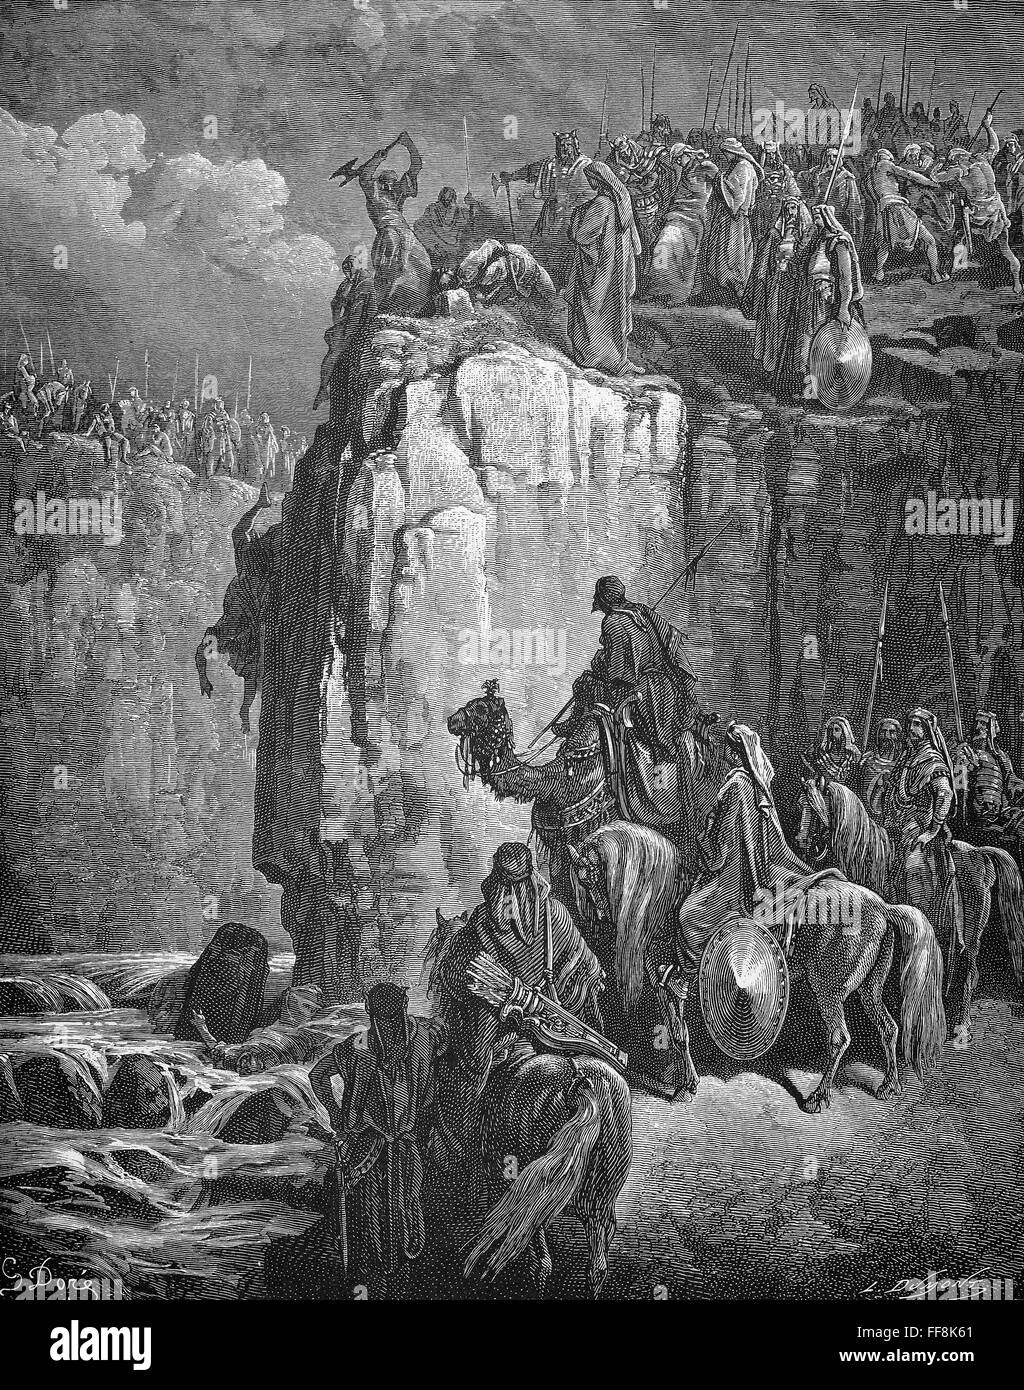 DOR╔: PROPHETS OF BAAL. /n'Slaughter of the Prophets of Baal' (I Kings 18:40). Wood engraving after Gustave DorΘ. Stock Photo